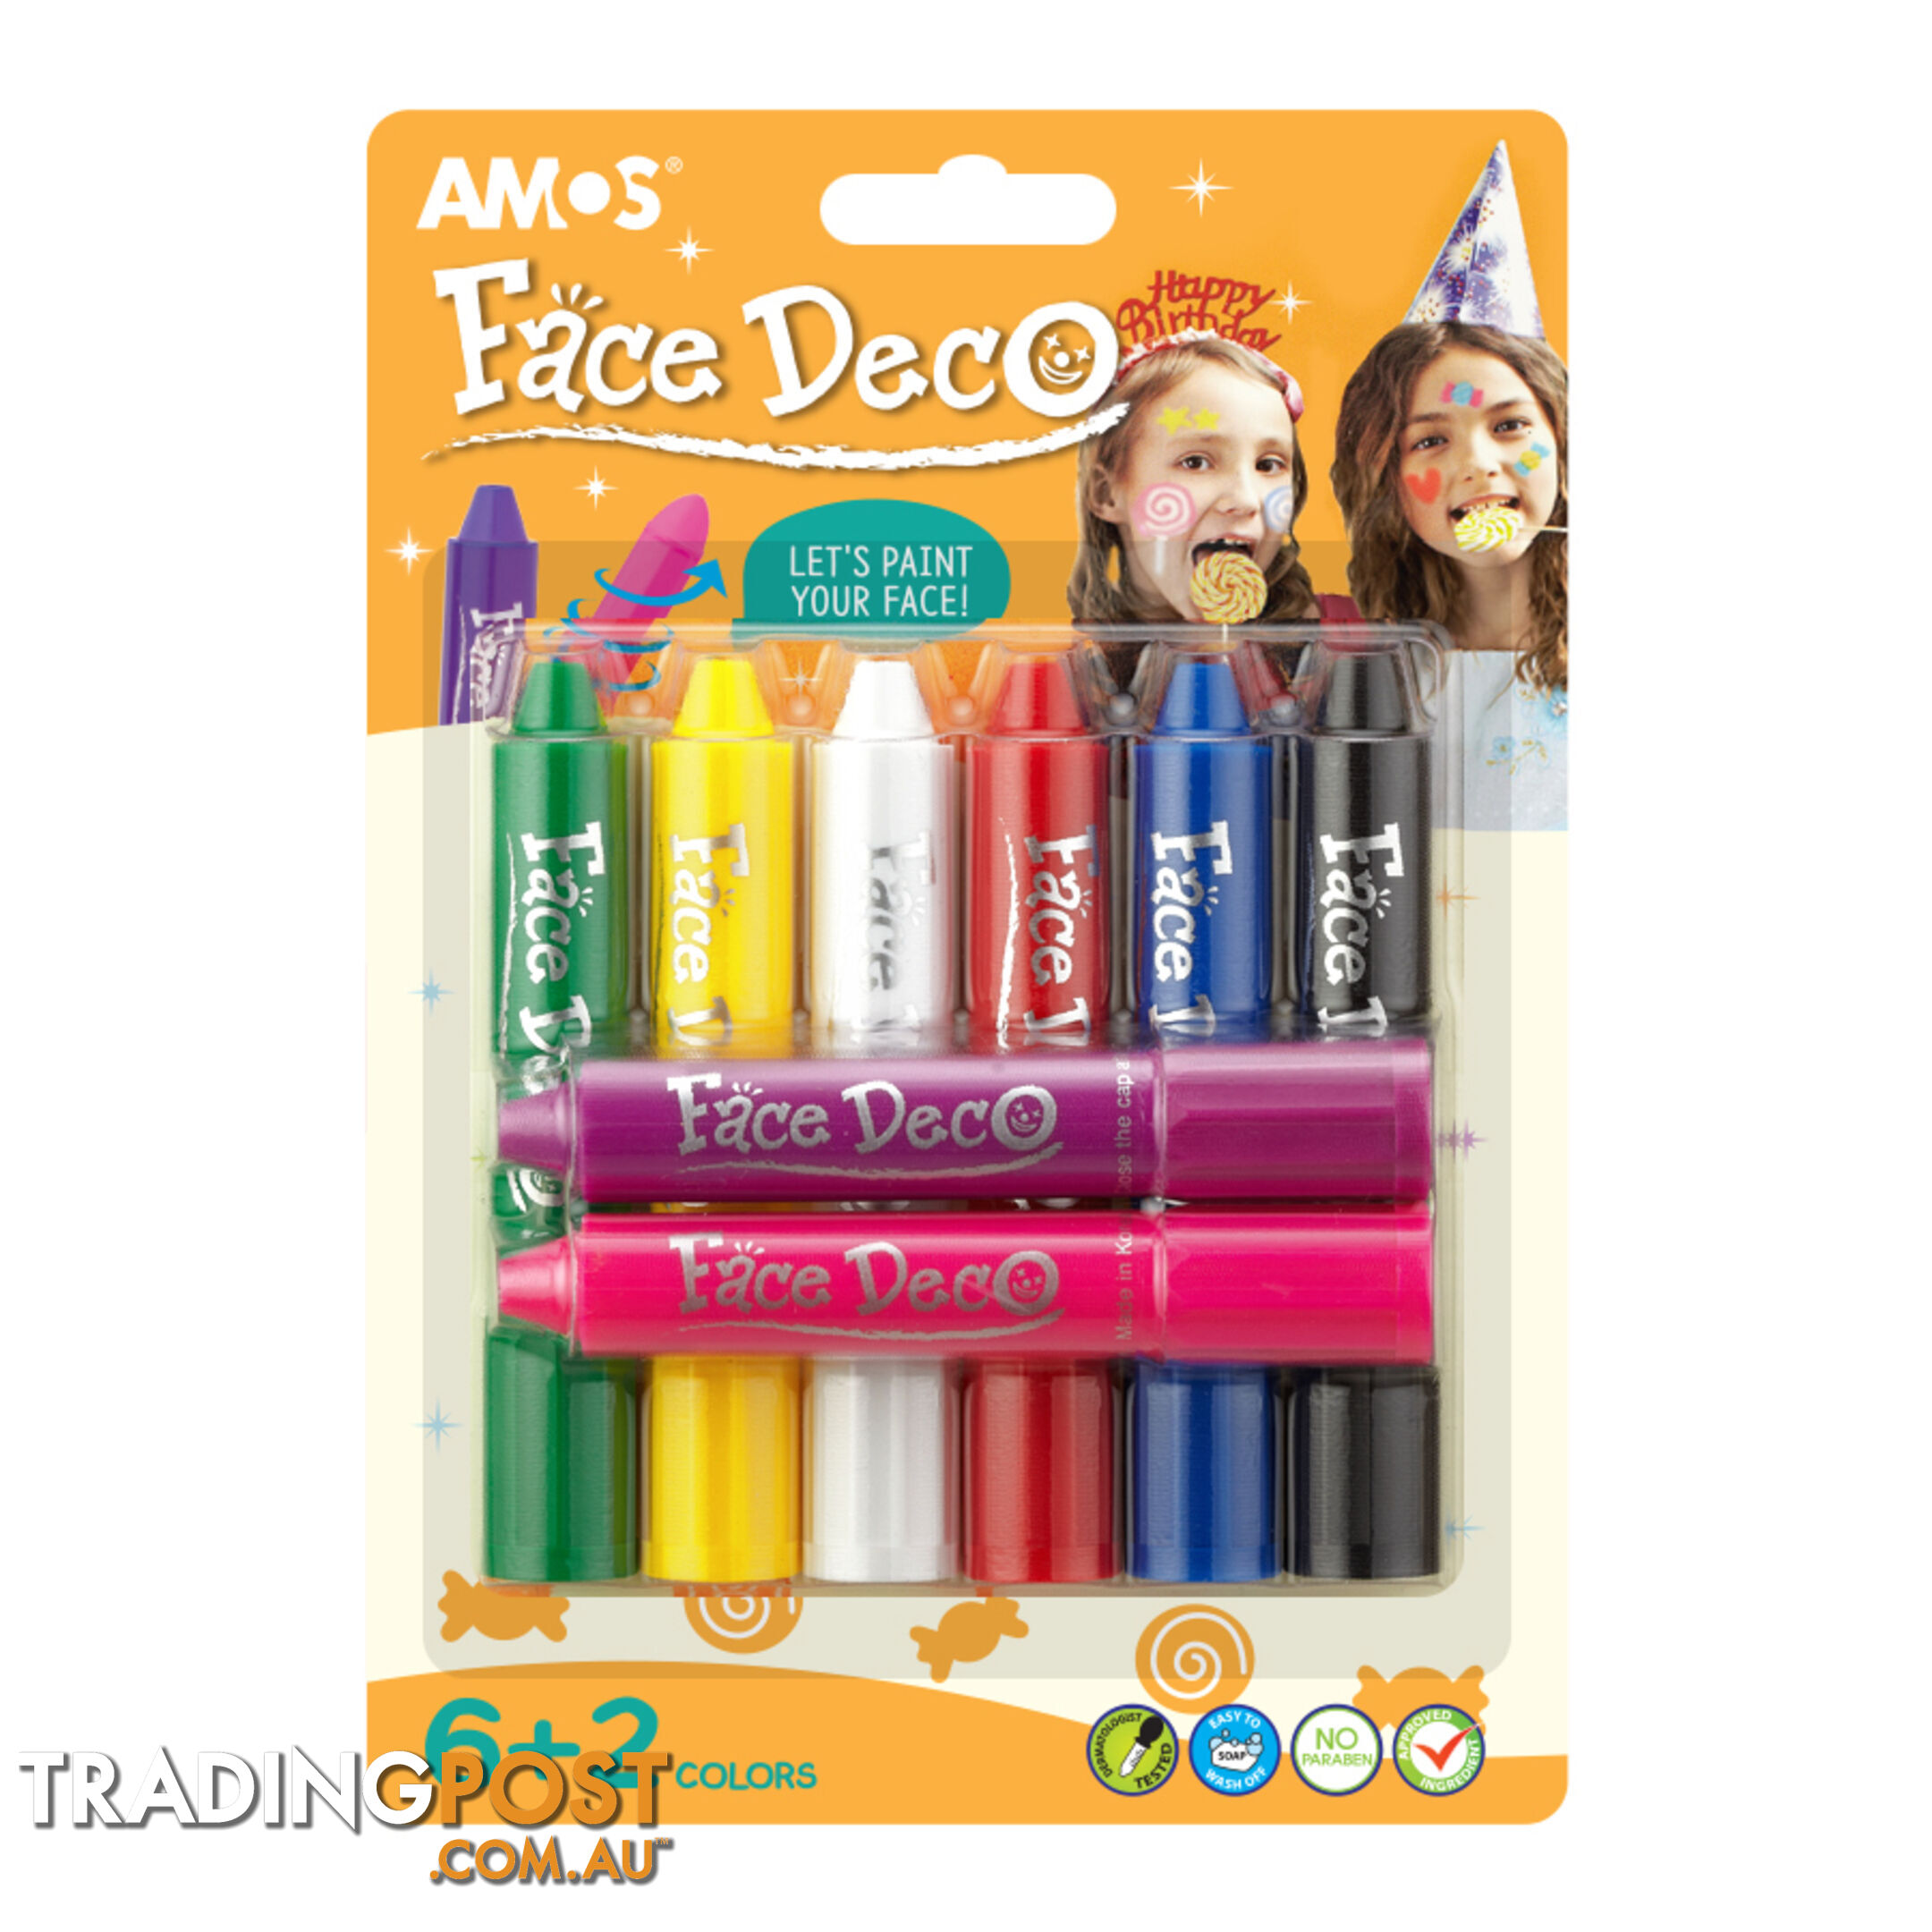 Face Deco 8 Pack - Amos - 8802946508945